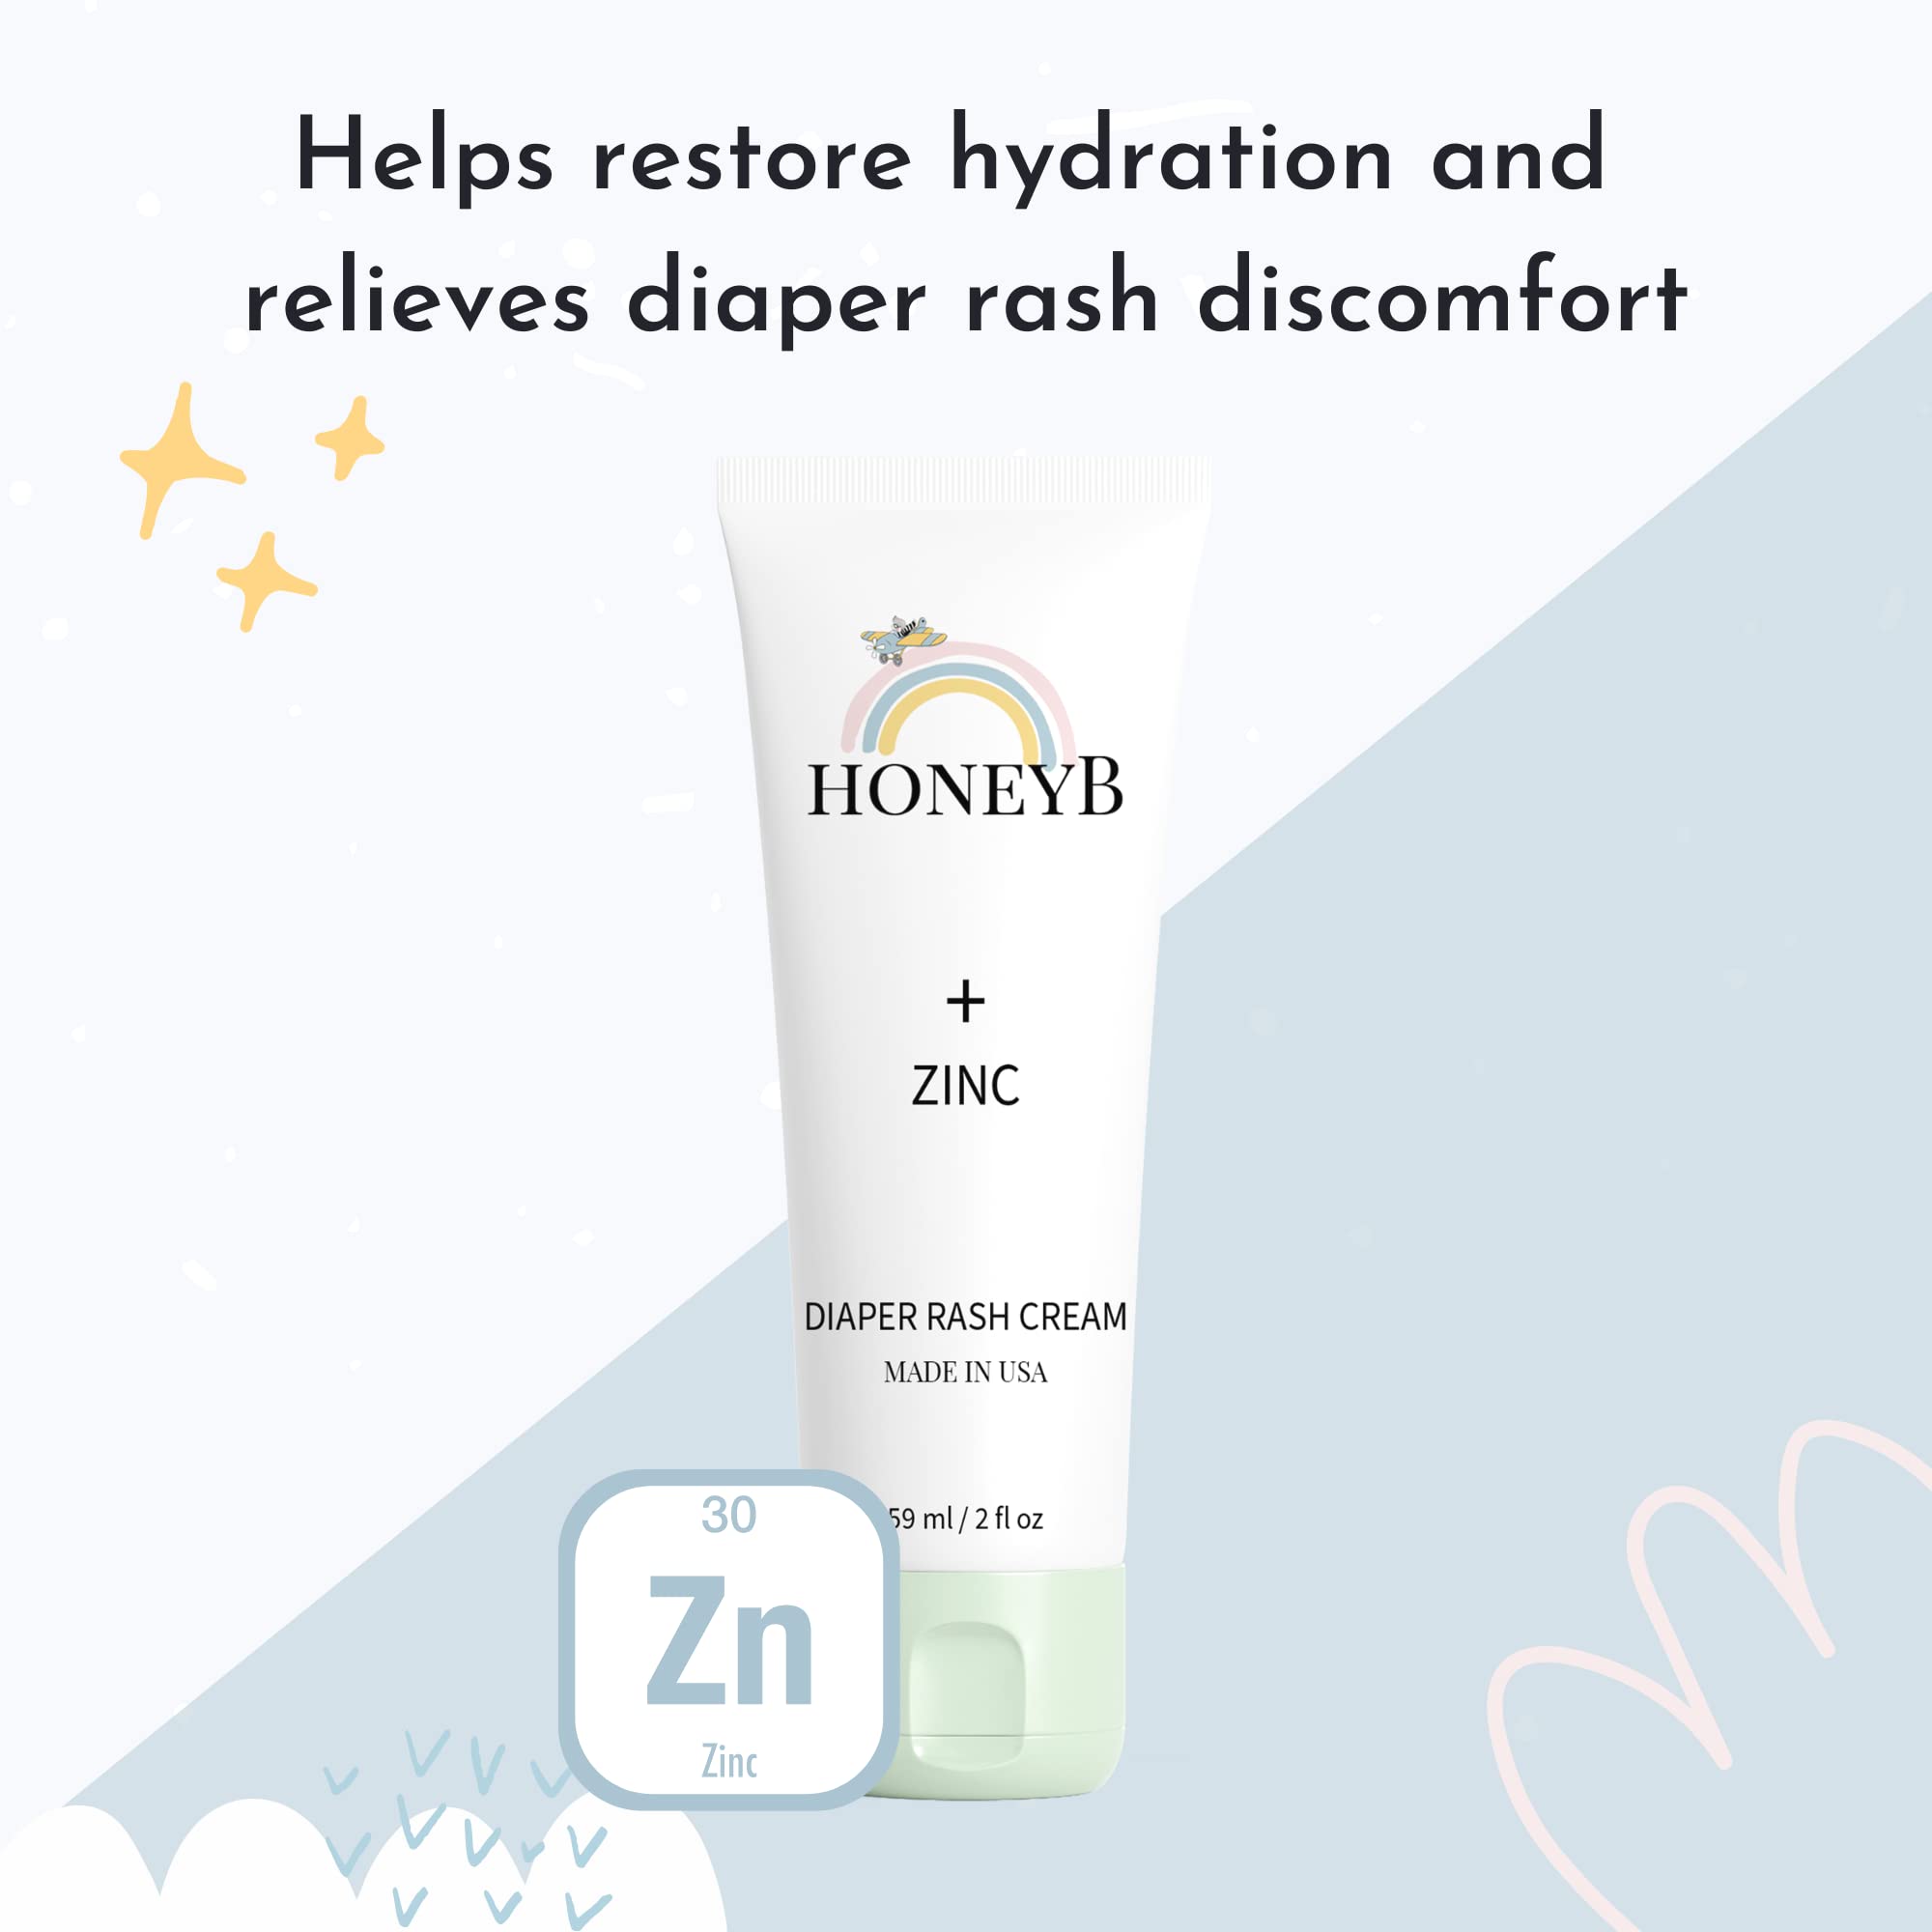 HONEYB Diaper Rash Cream with Zinc – Soothe and Prevent Diaper Rash with Zinc and a Powerful Blend of Natural Ingredients – Non-Toxic Formula, 2 fl oz